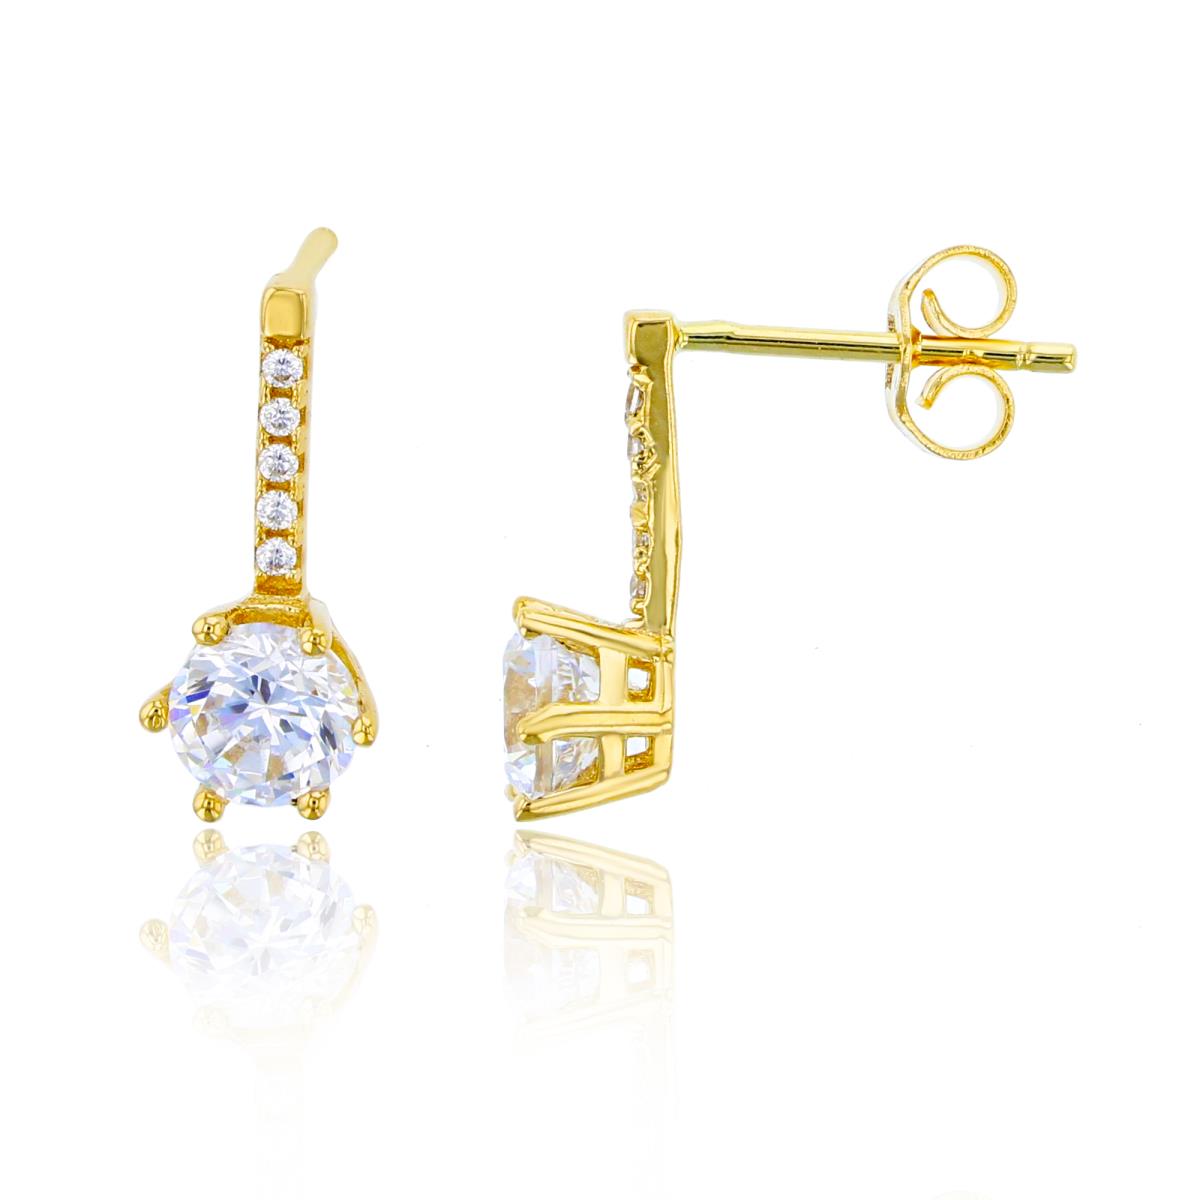 14K Yellow Gold 5.25mm Rnd CZ 6-Prongs Solitaire Earring